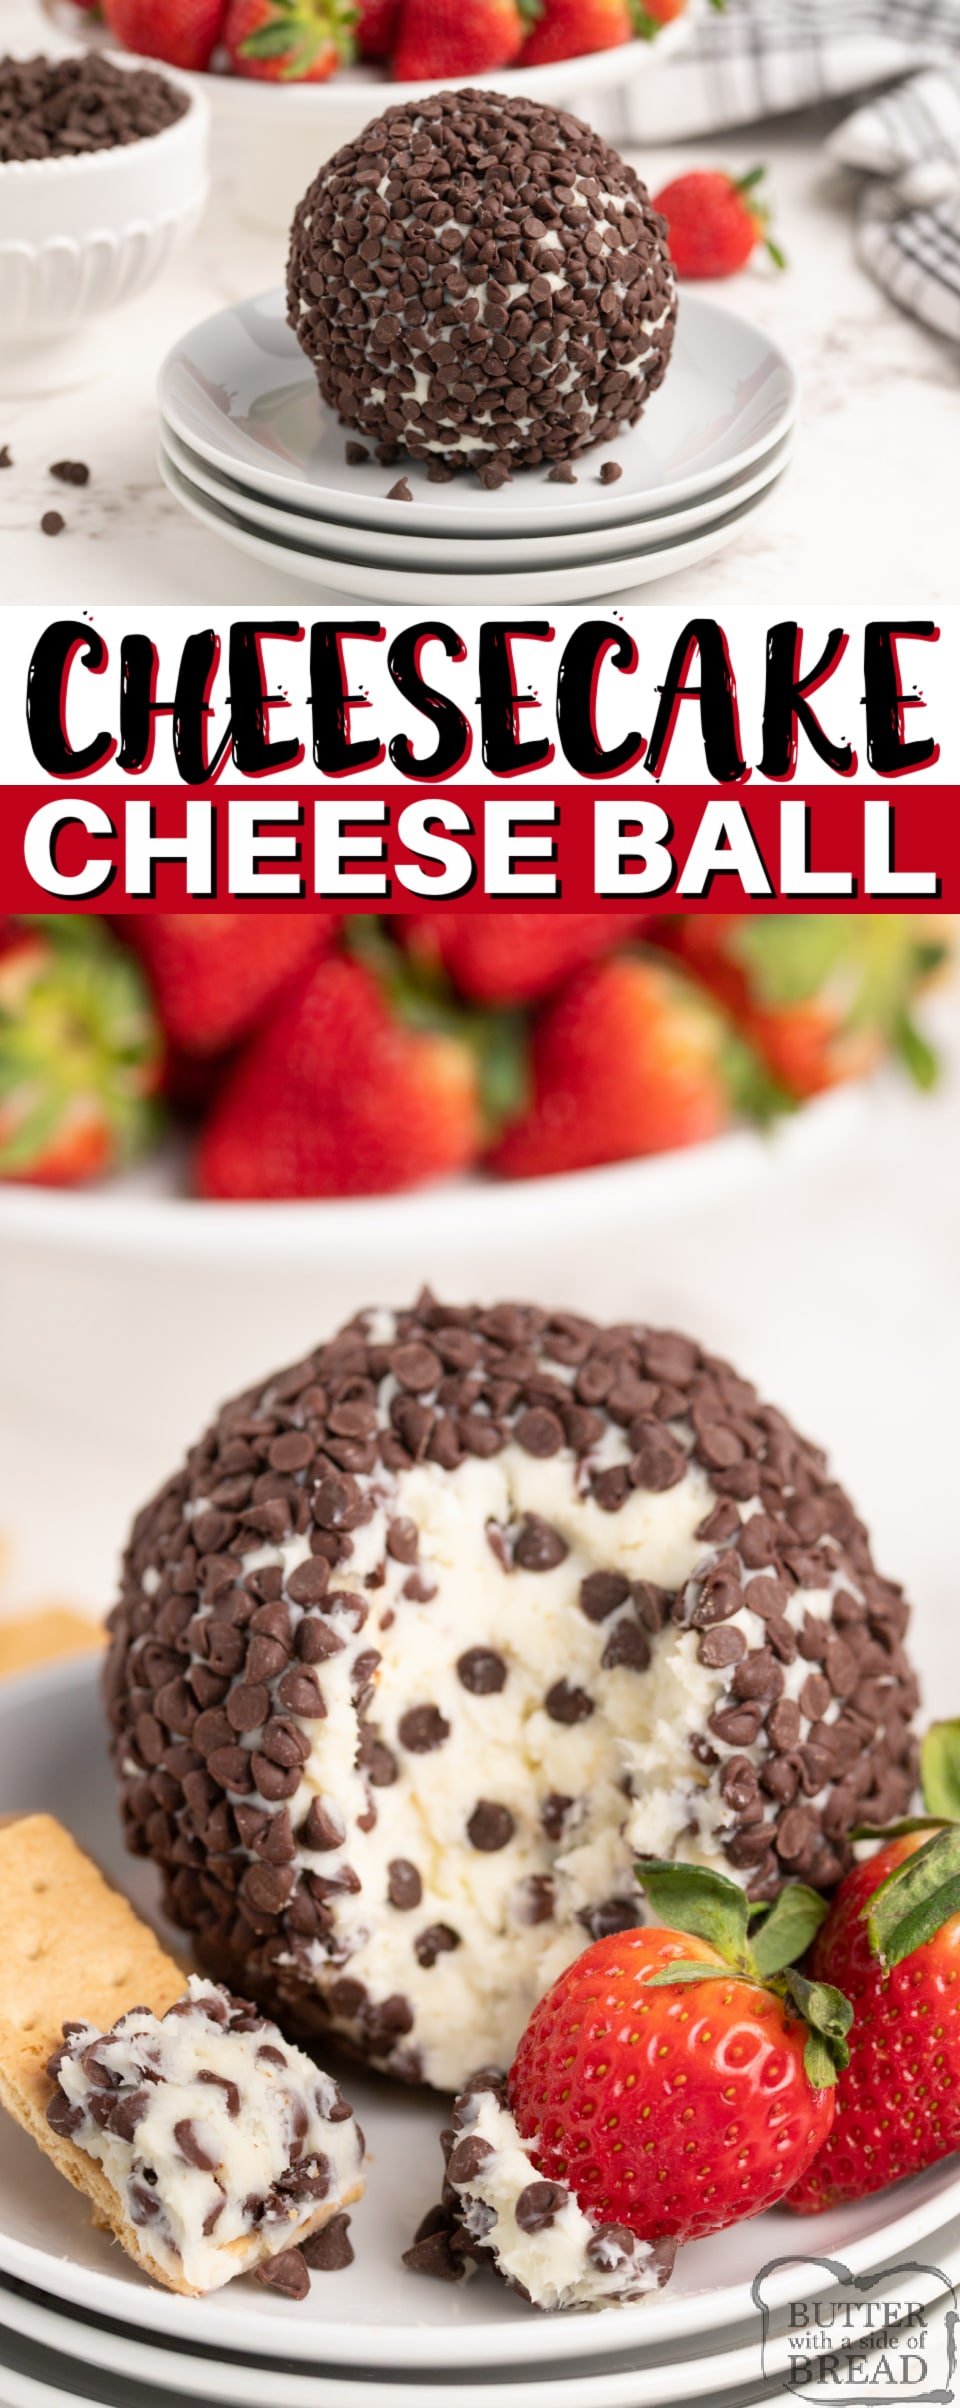 Cheesecake Cheese Ball recipe made with only 5 ingredients for an easy appetizer...or dessert! This chocolate chip cheesecake cheese ball pairs perfectly with fresh strawberries and graham crackers and only takes a few minutes to make!